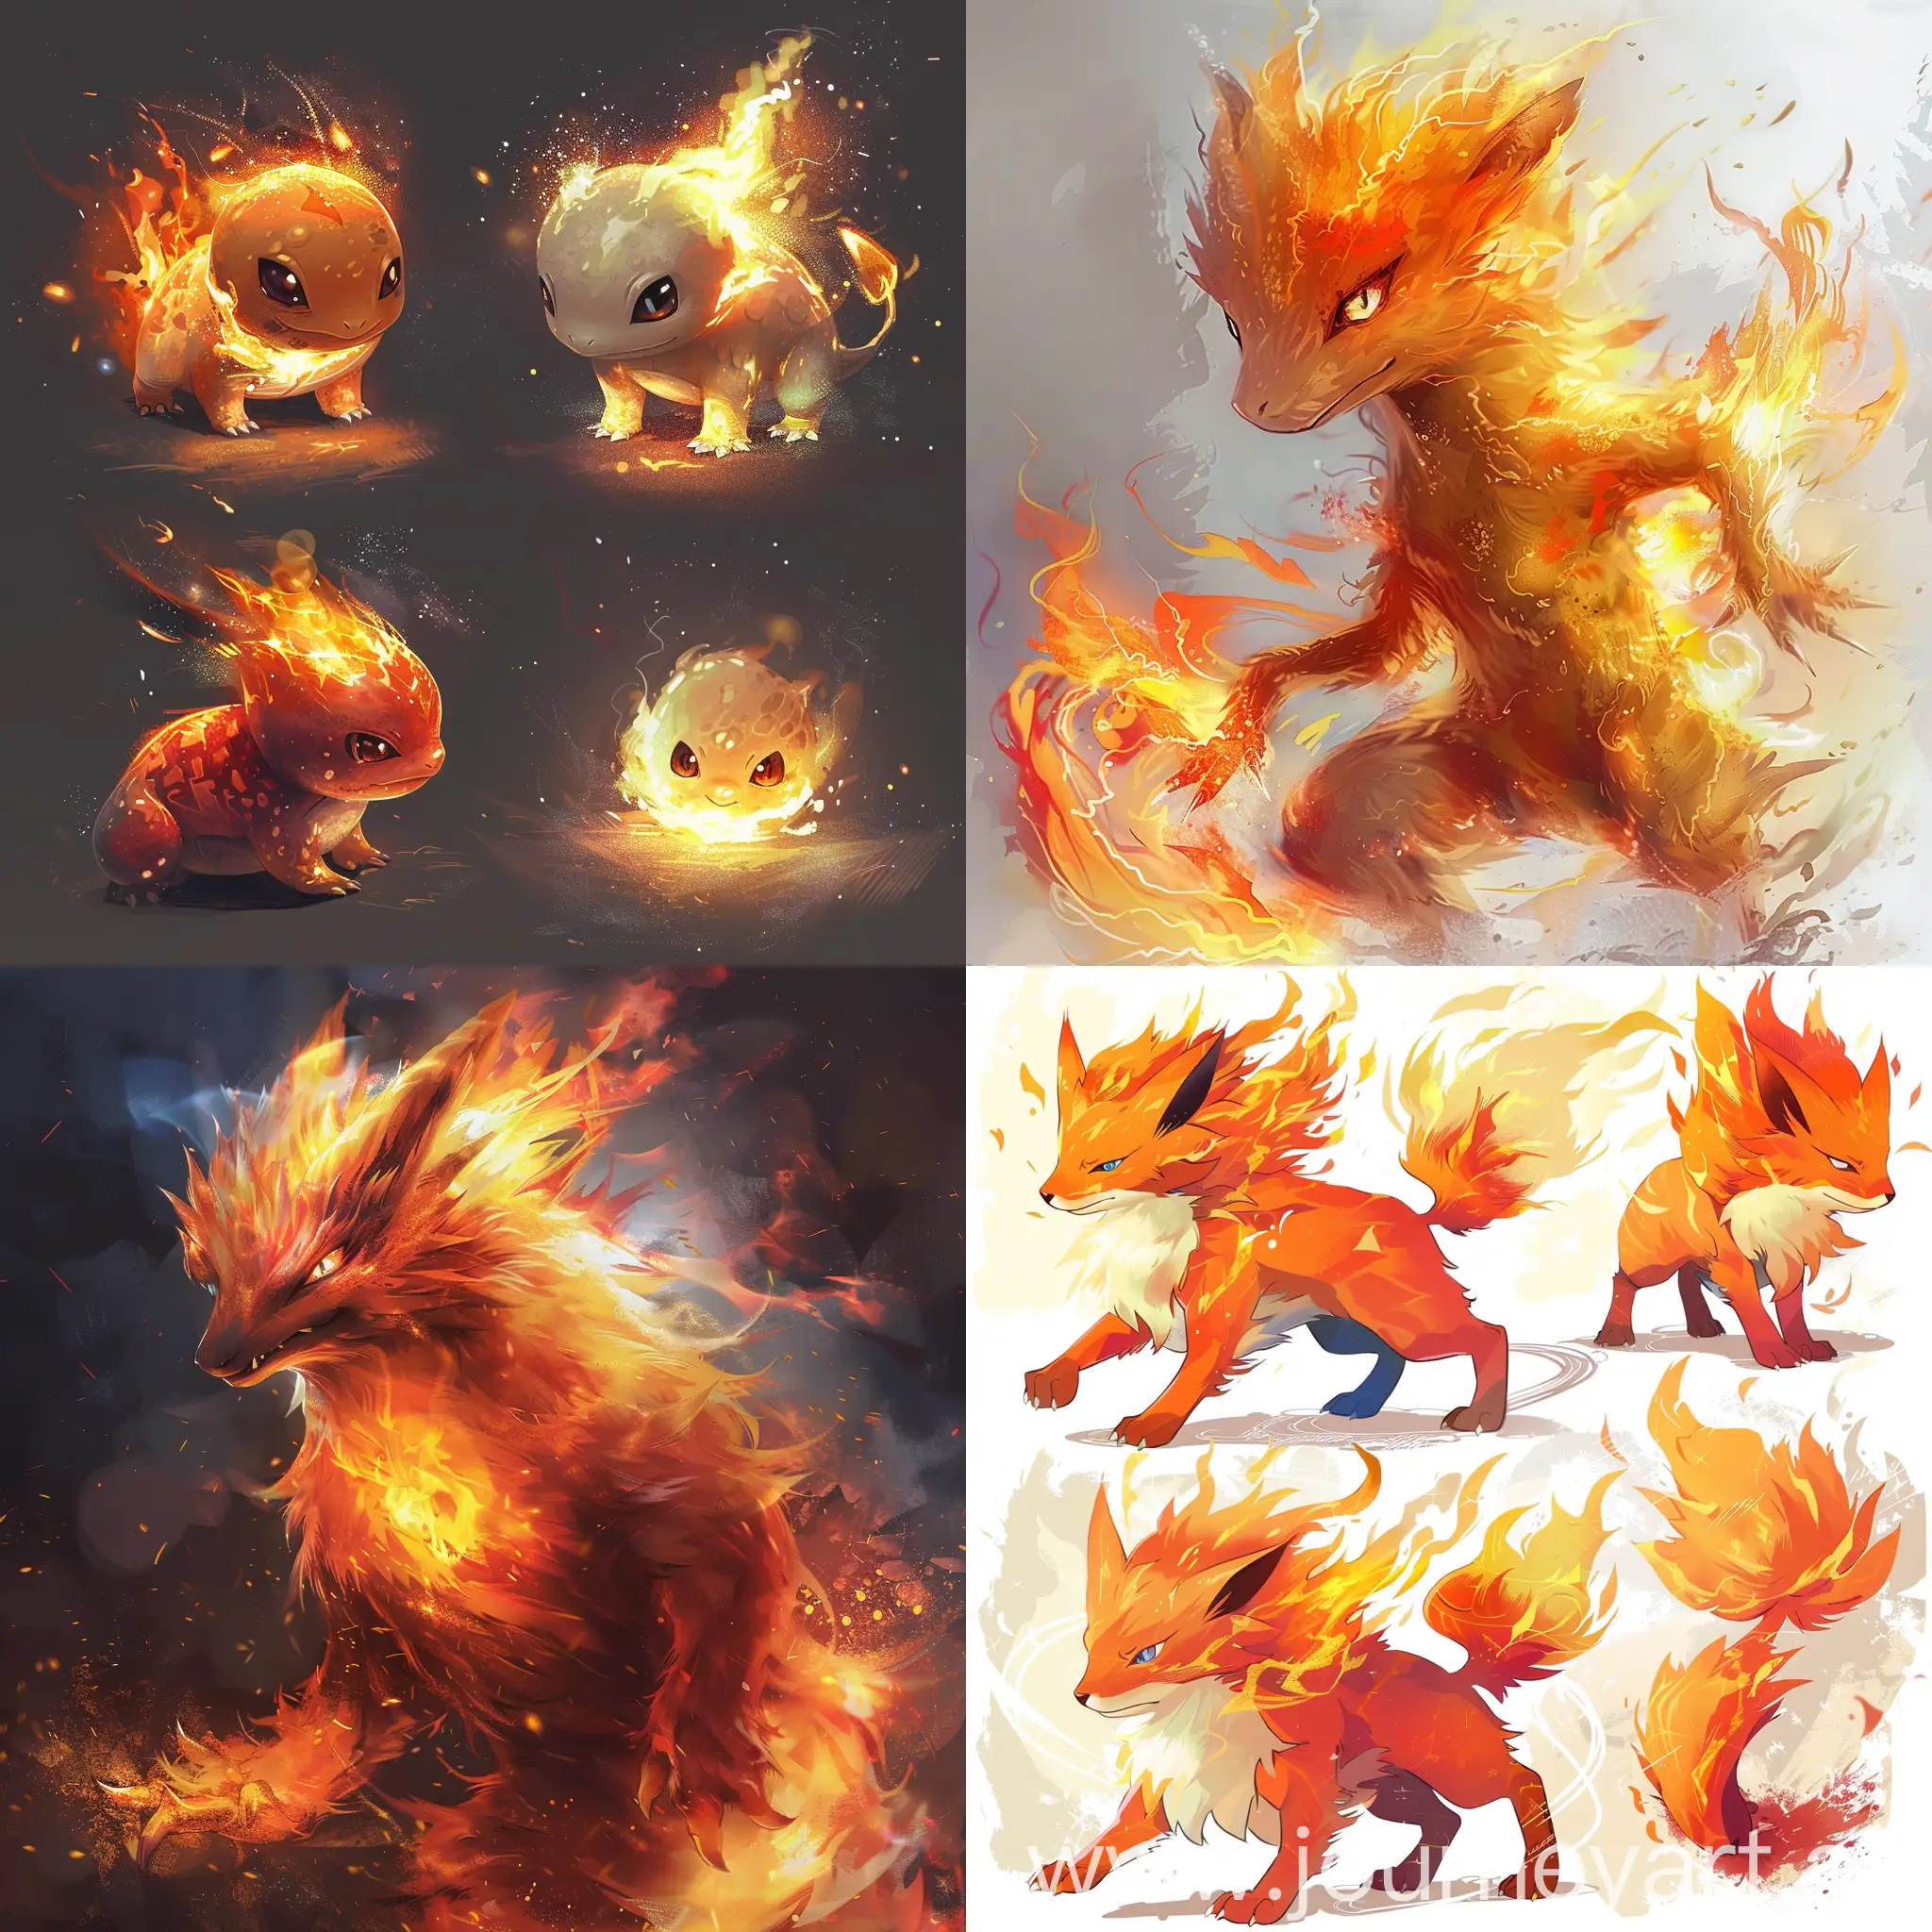 Colorful-Anime-Fire-Type-Creatures-A-Hundred-Unique-PokemonLike-Beings